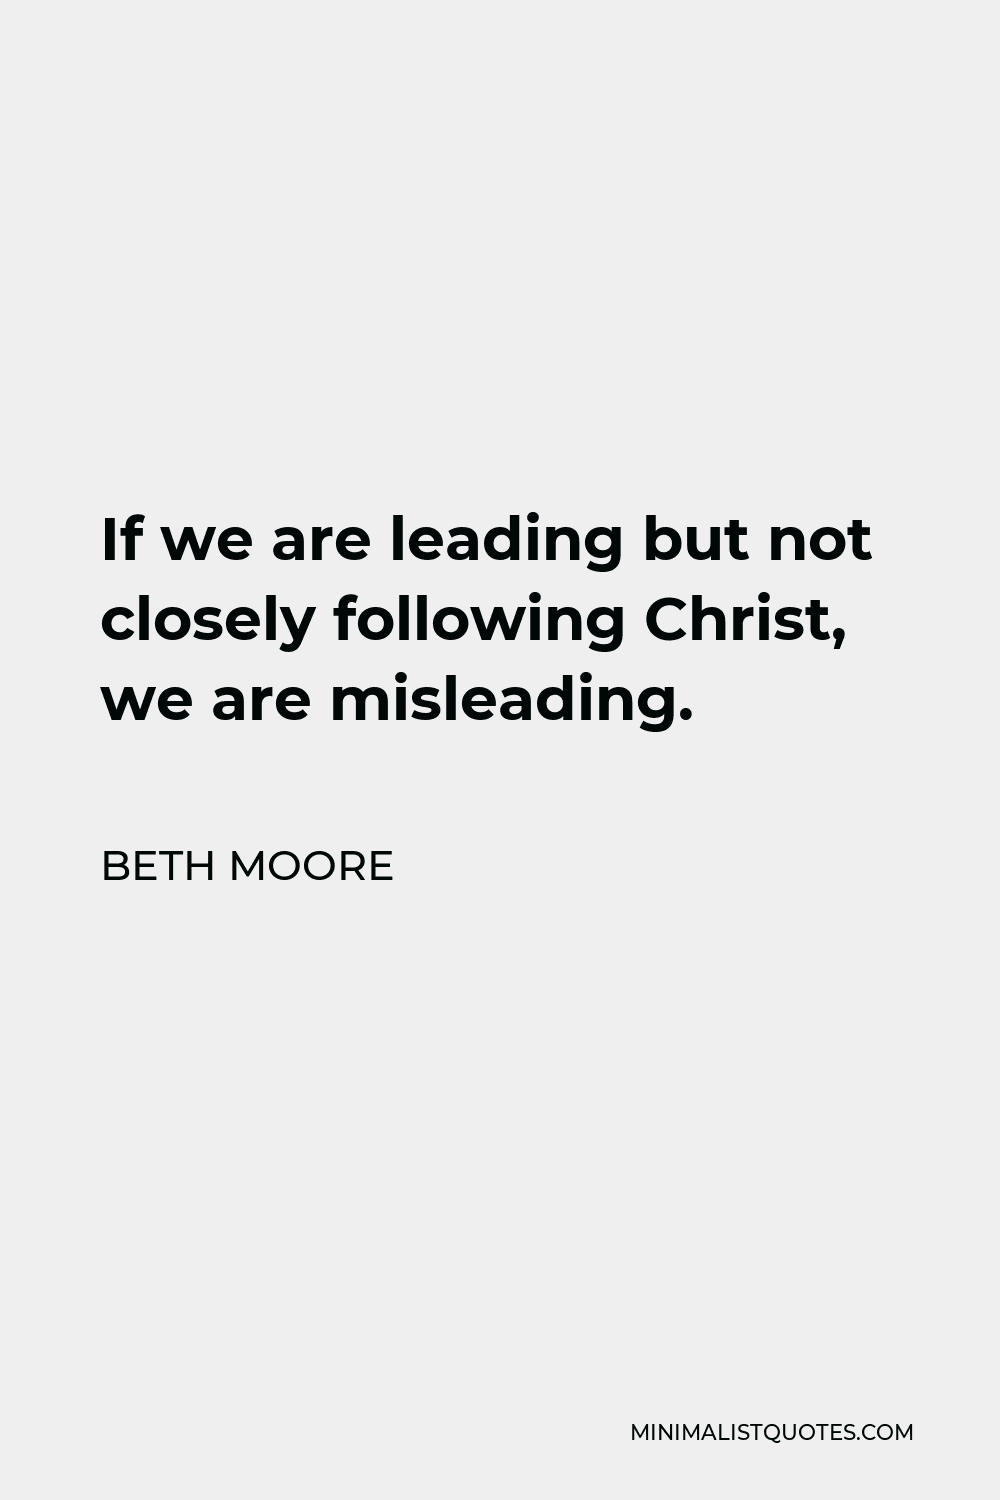 Beth Moore Quote - If we are leading but not closely following Christ, we are misleading.